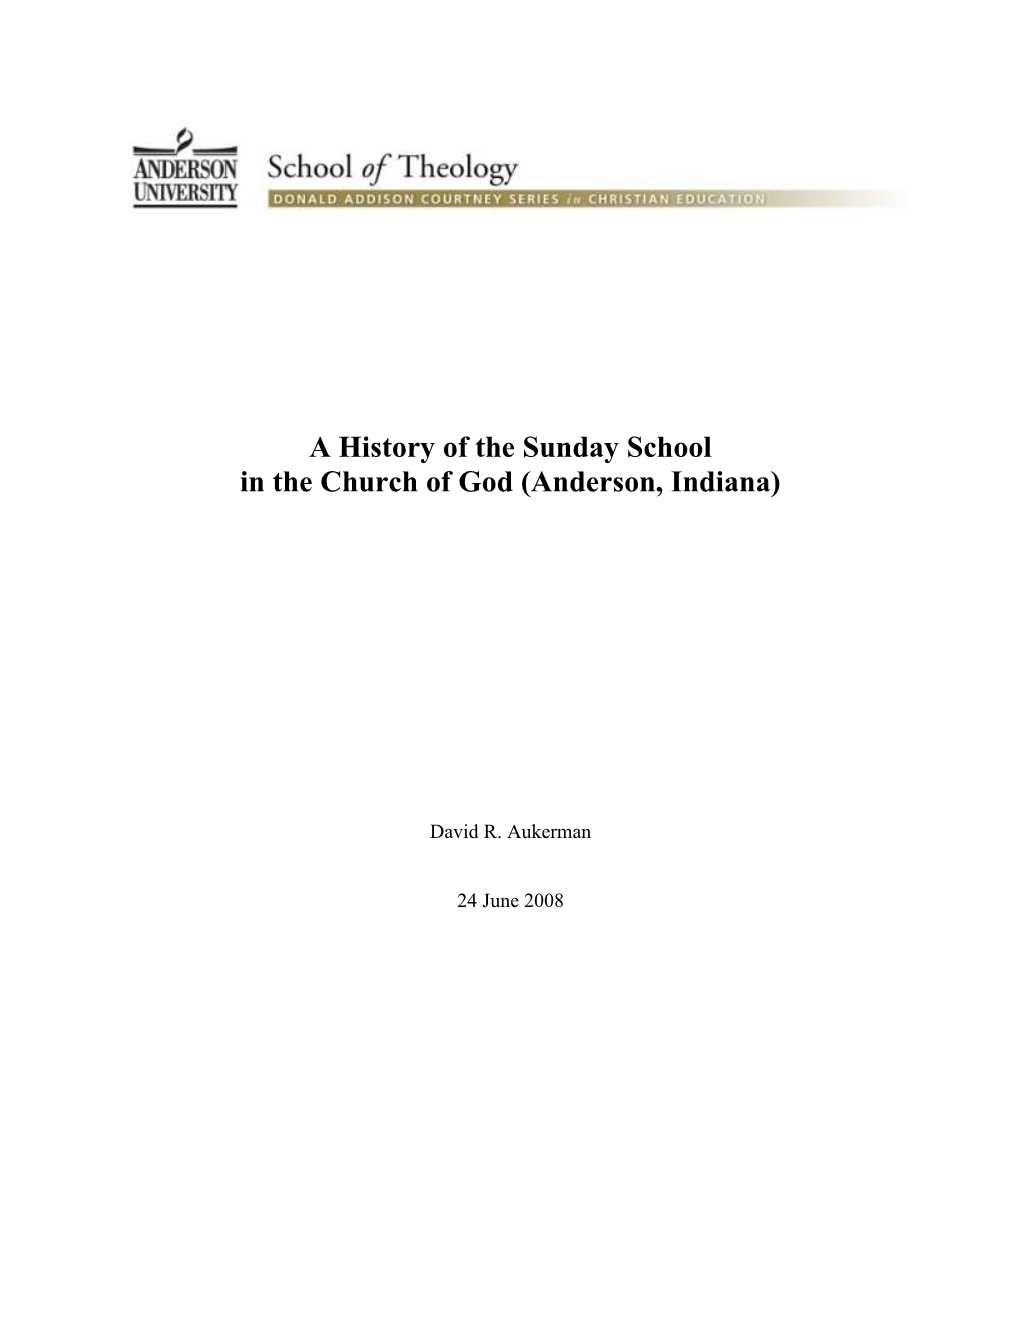 A History of the Sunday School in the Church of God (Anderson, Indiana)